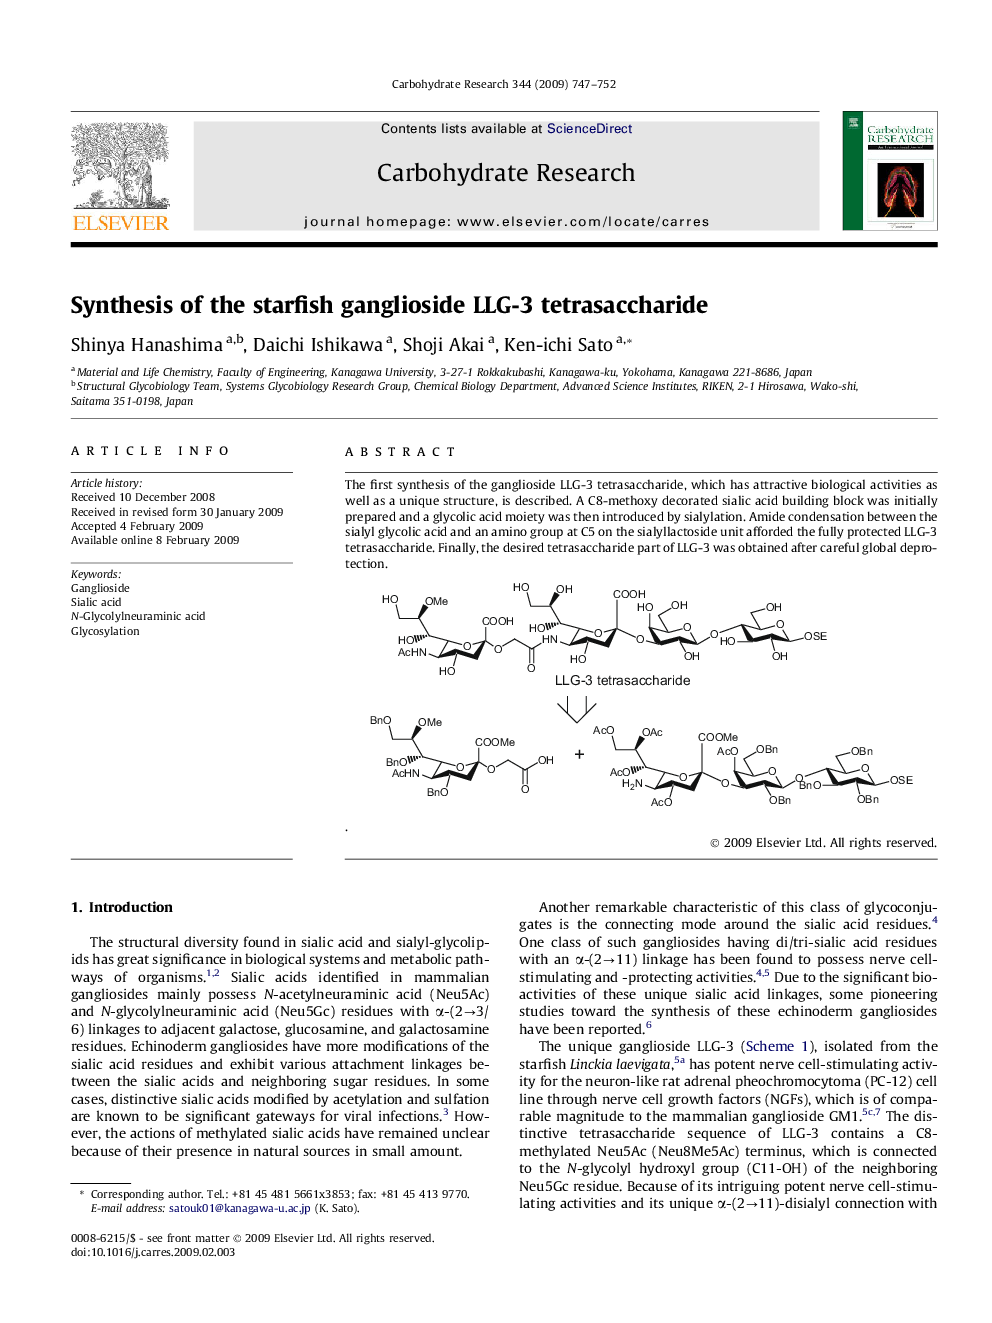 Synthesis of the starfish ganglioside LLG-3 tetrasaccharide